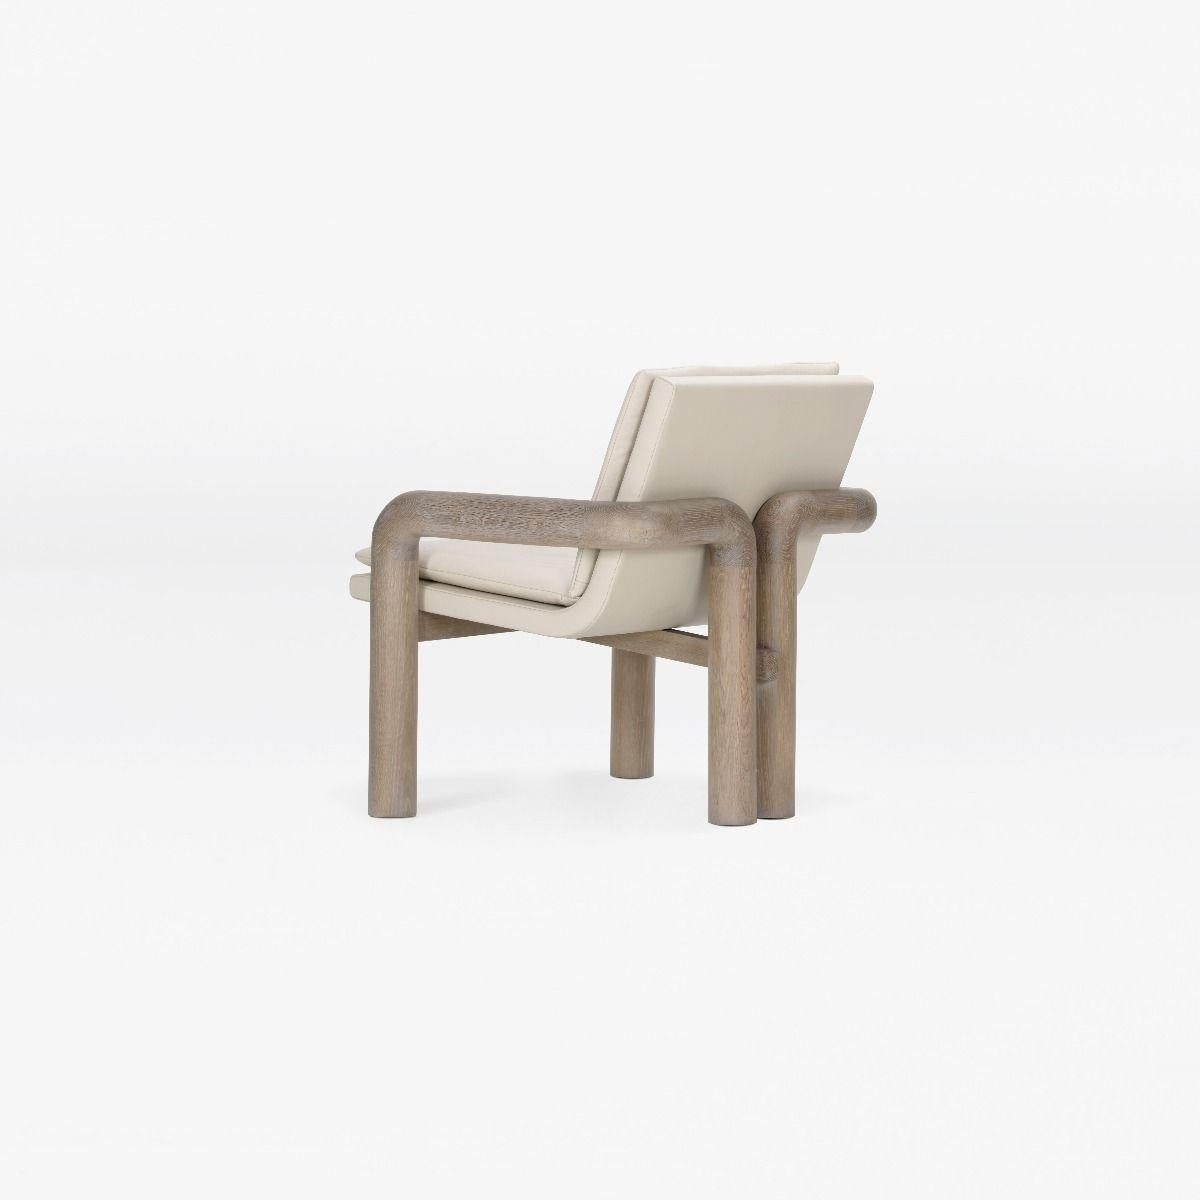 A small scale lounge chair, with solid wood armrest and sculpted double back leg detail.

MATERIALS
Shown in Leather Solid White Oak / Limed Medium Stain 01-SF

MEASUREMENTS
27.25”W x 28.75”D x 30”H x 15.5” SH

HANDMADE IN CANADA

PRICING